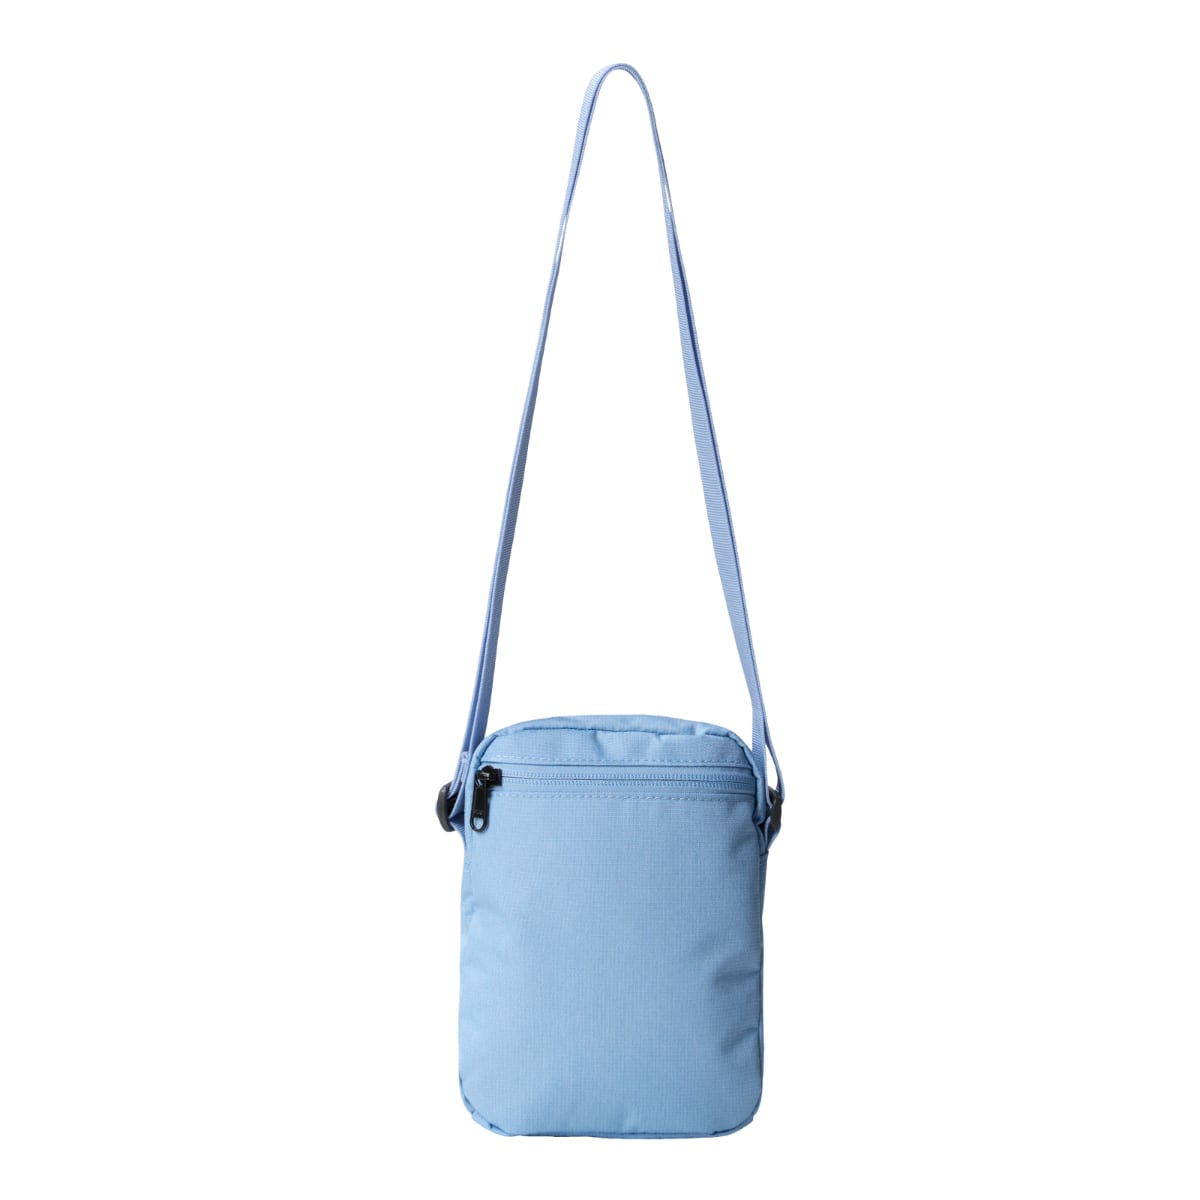 The North Face Jester CROSSBODY | Steel Blue